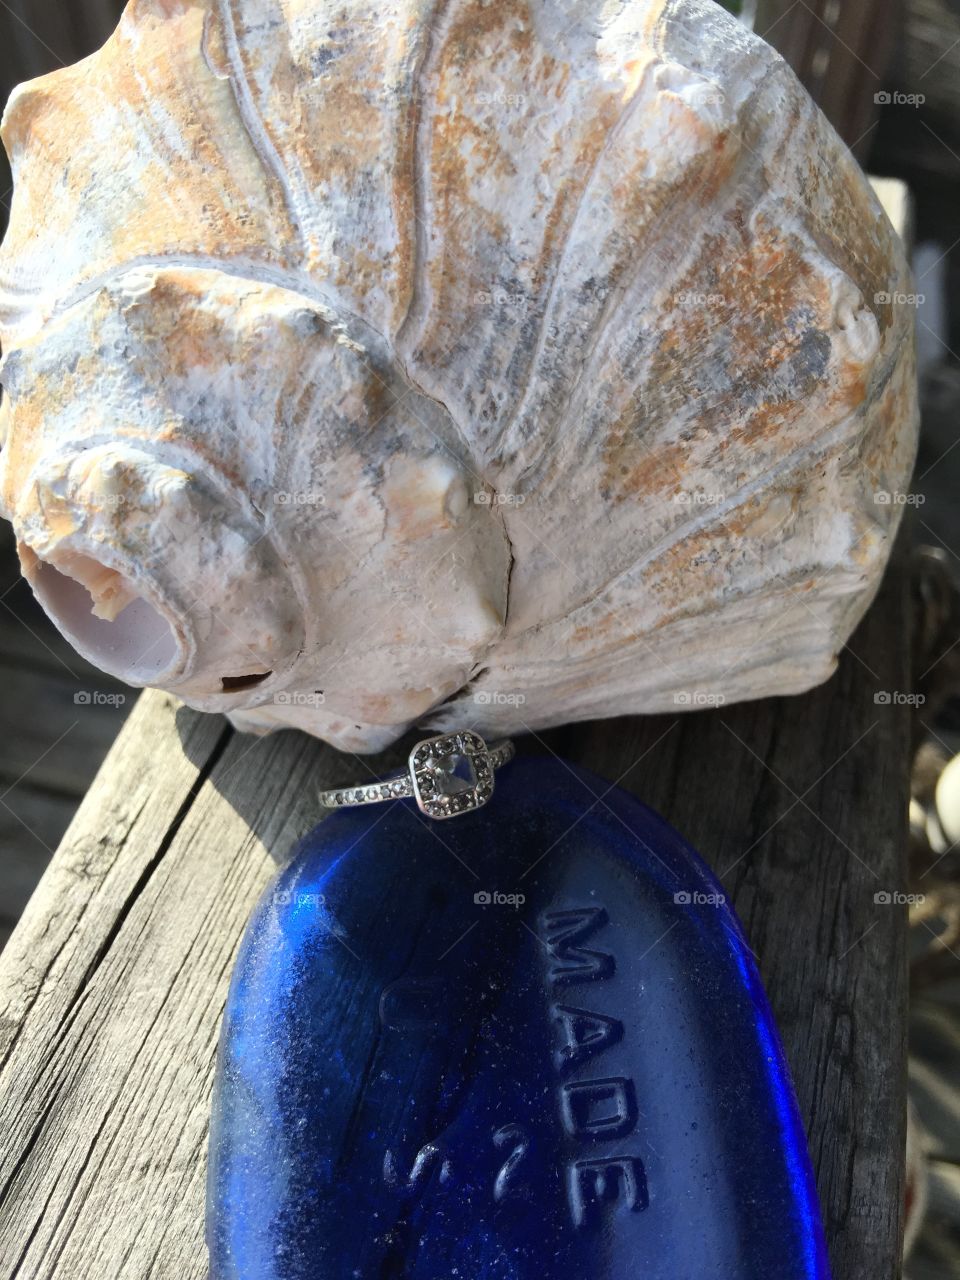 Beautiful shell and ring cobalt blue glass all look cool together 